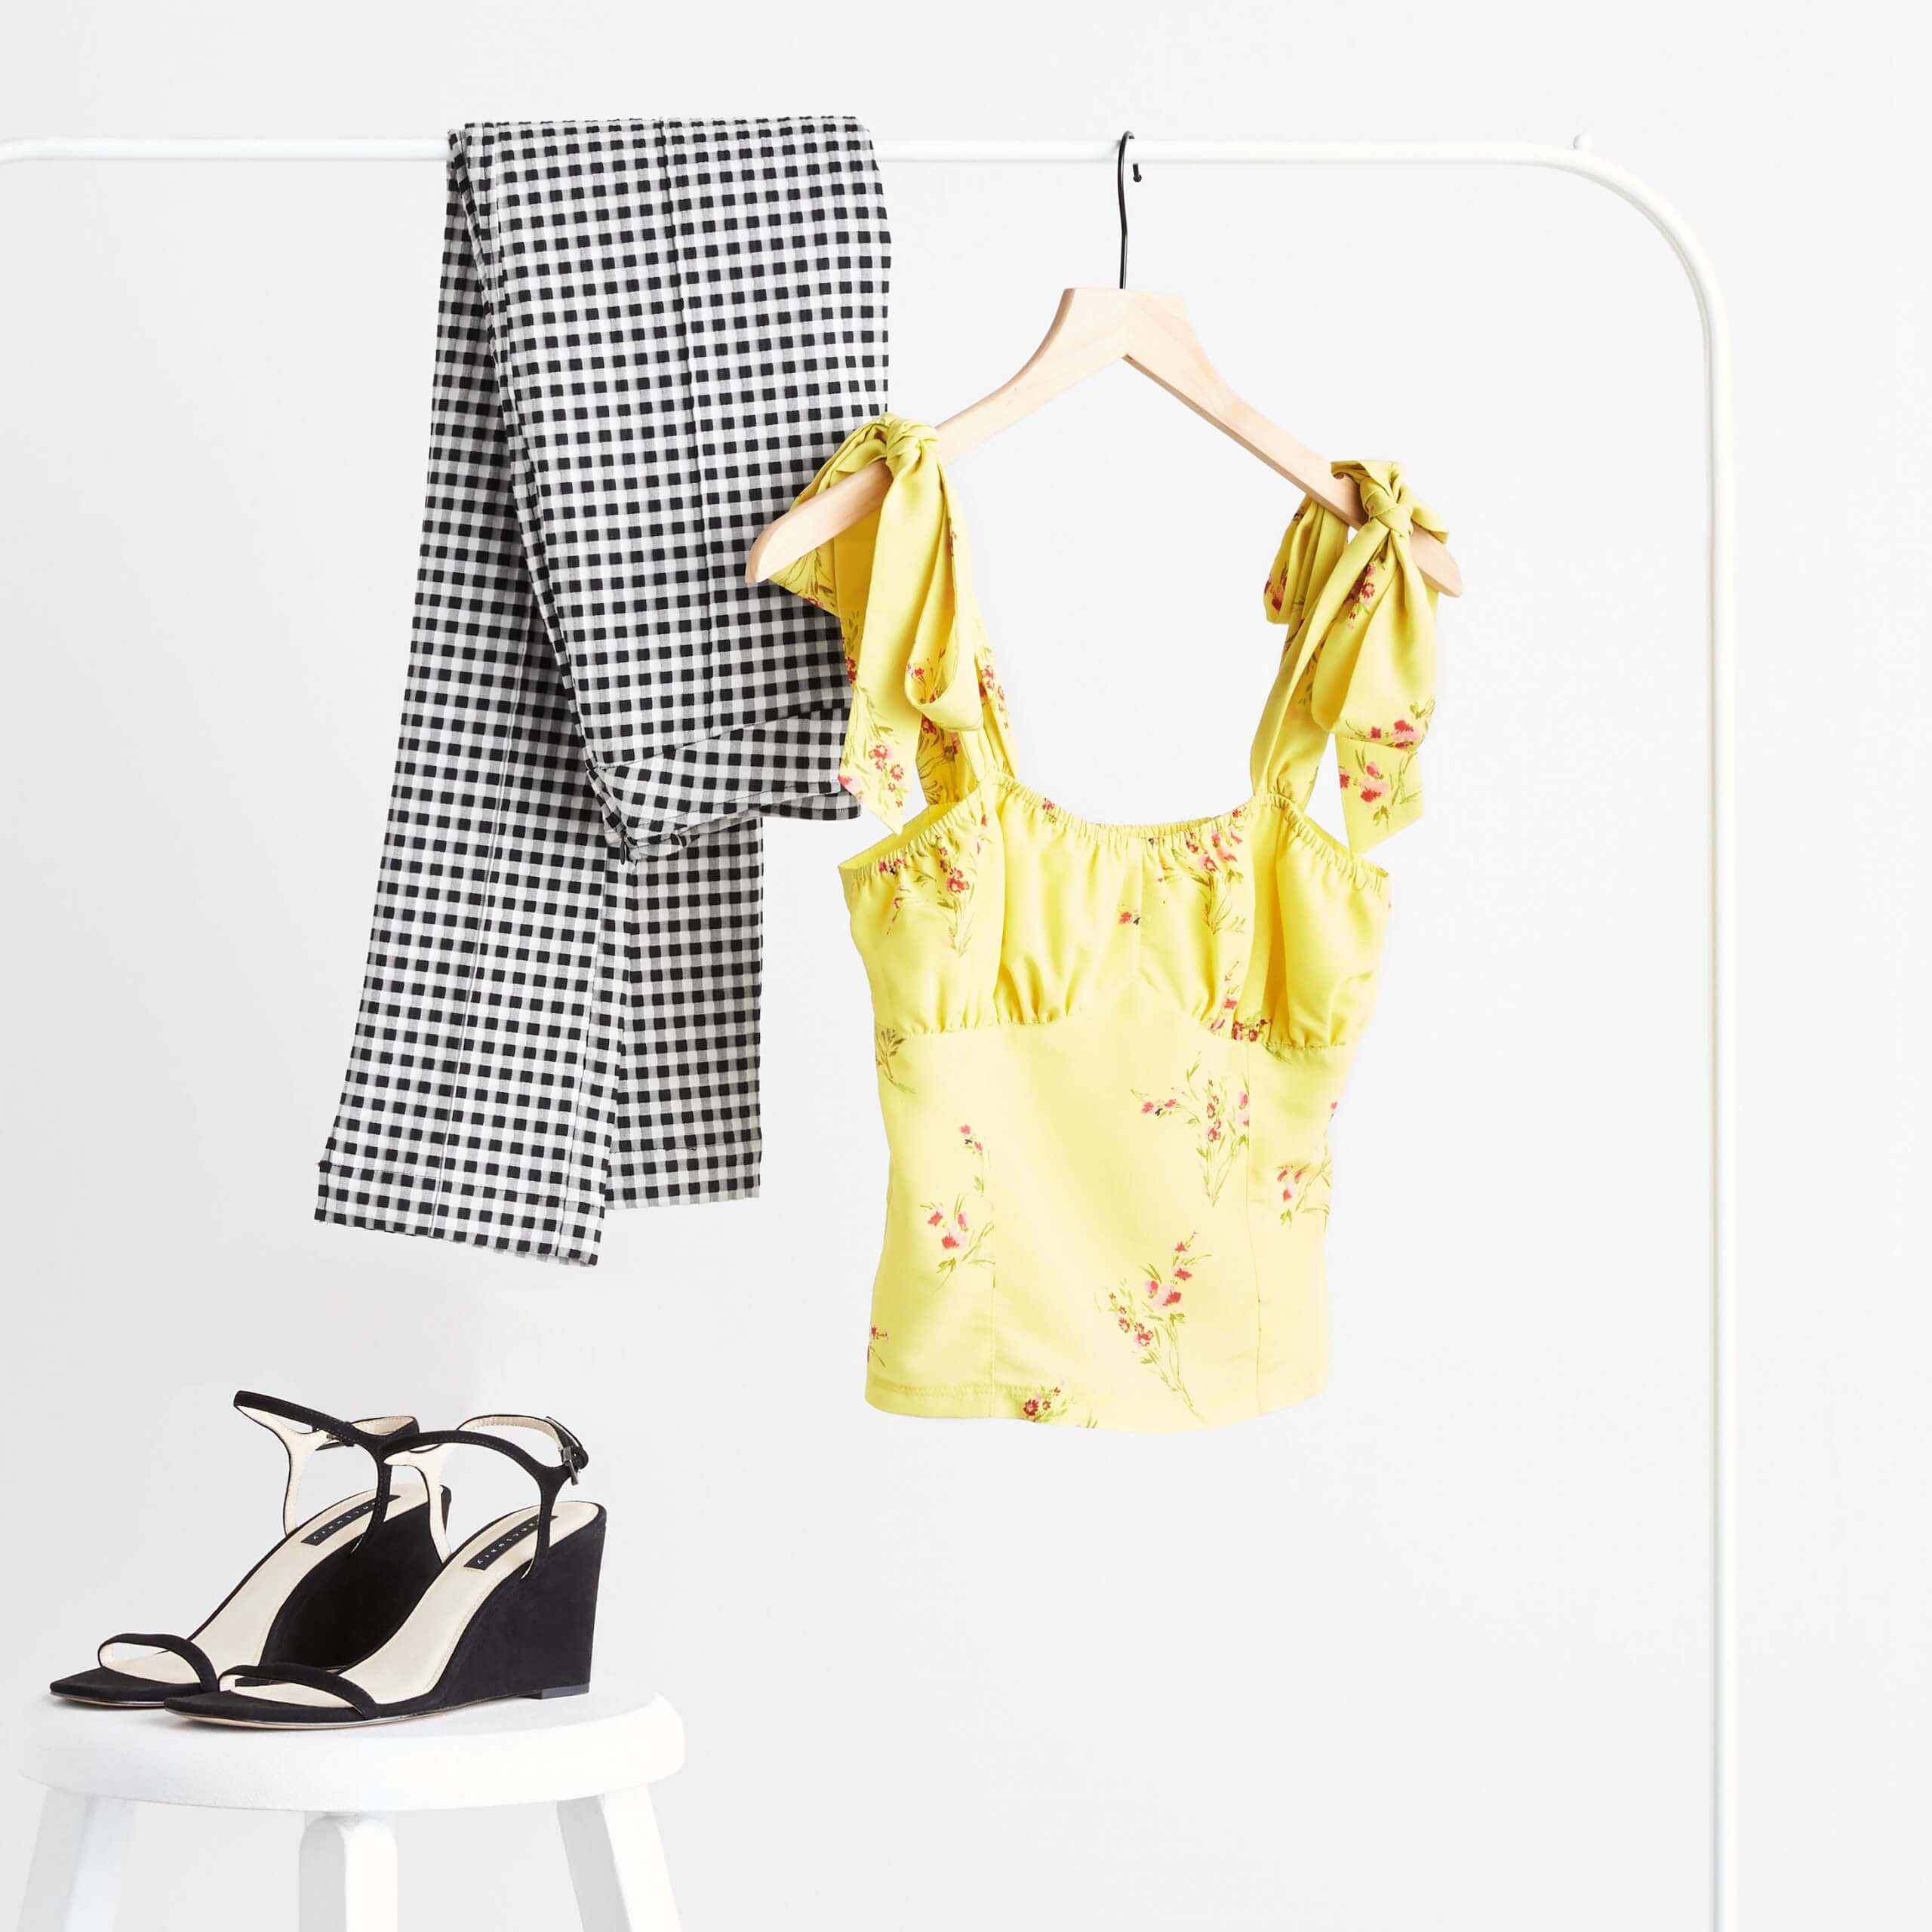 Stitch Fix Women's yellow floral ruffle sleeve top and black and white checkered pants hanging on rack next to black wedges on white stool. 